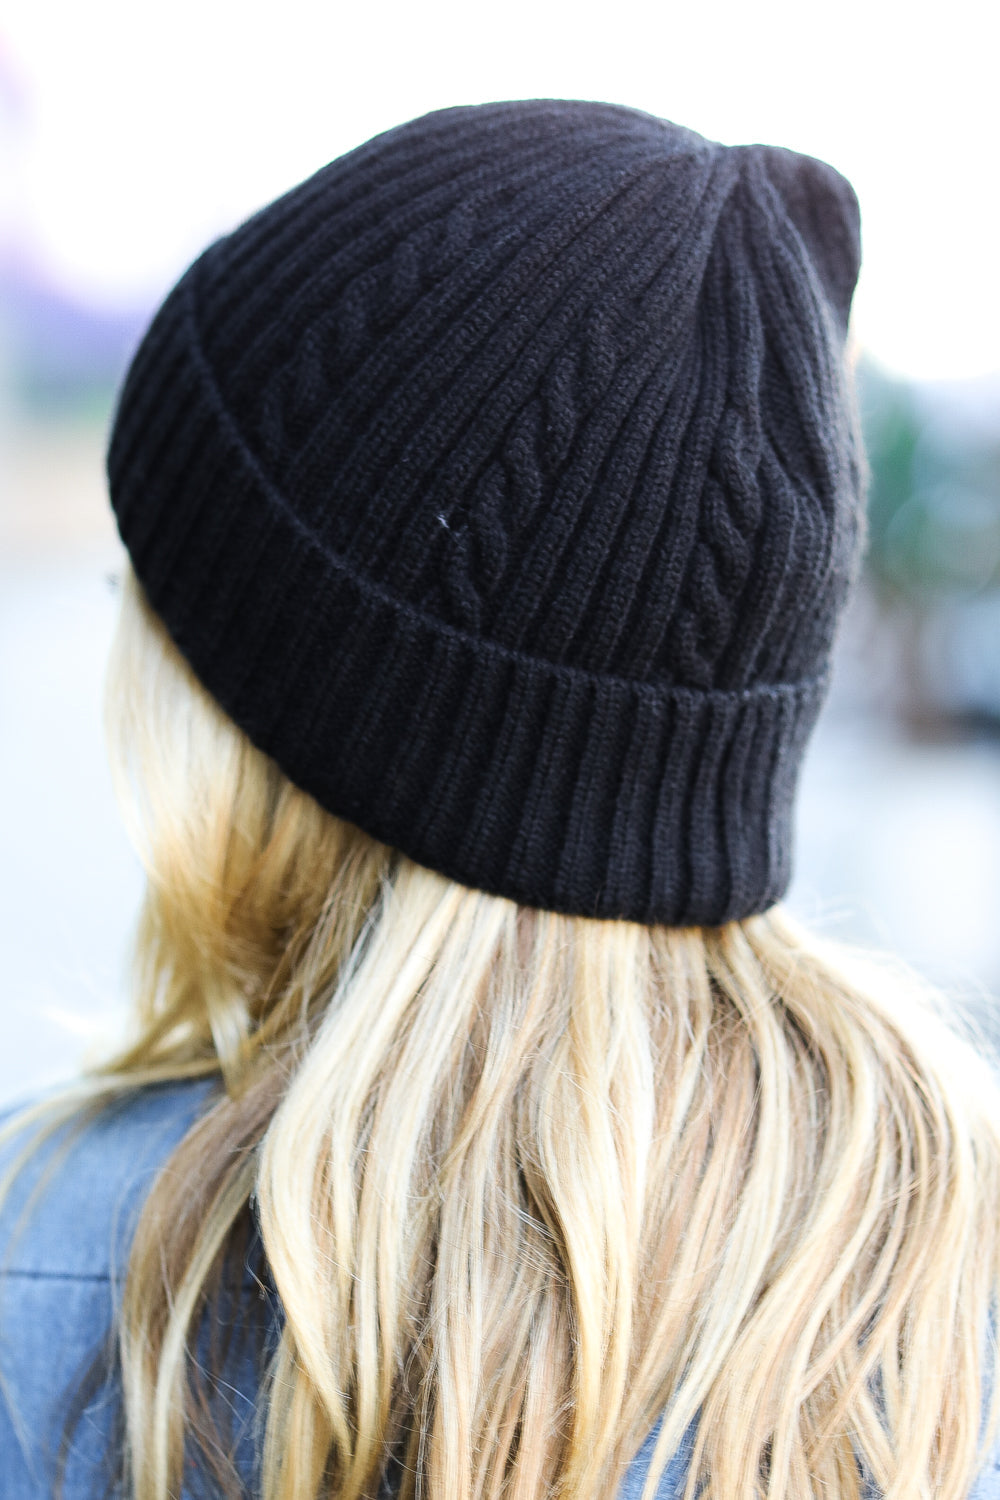 Black Cable Knit Beanie - Sybaritic Bags & Clothing